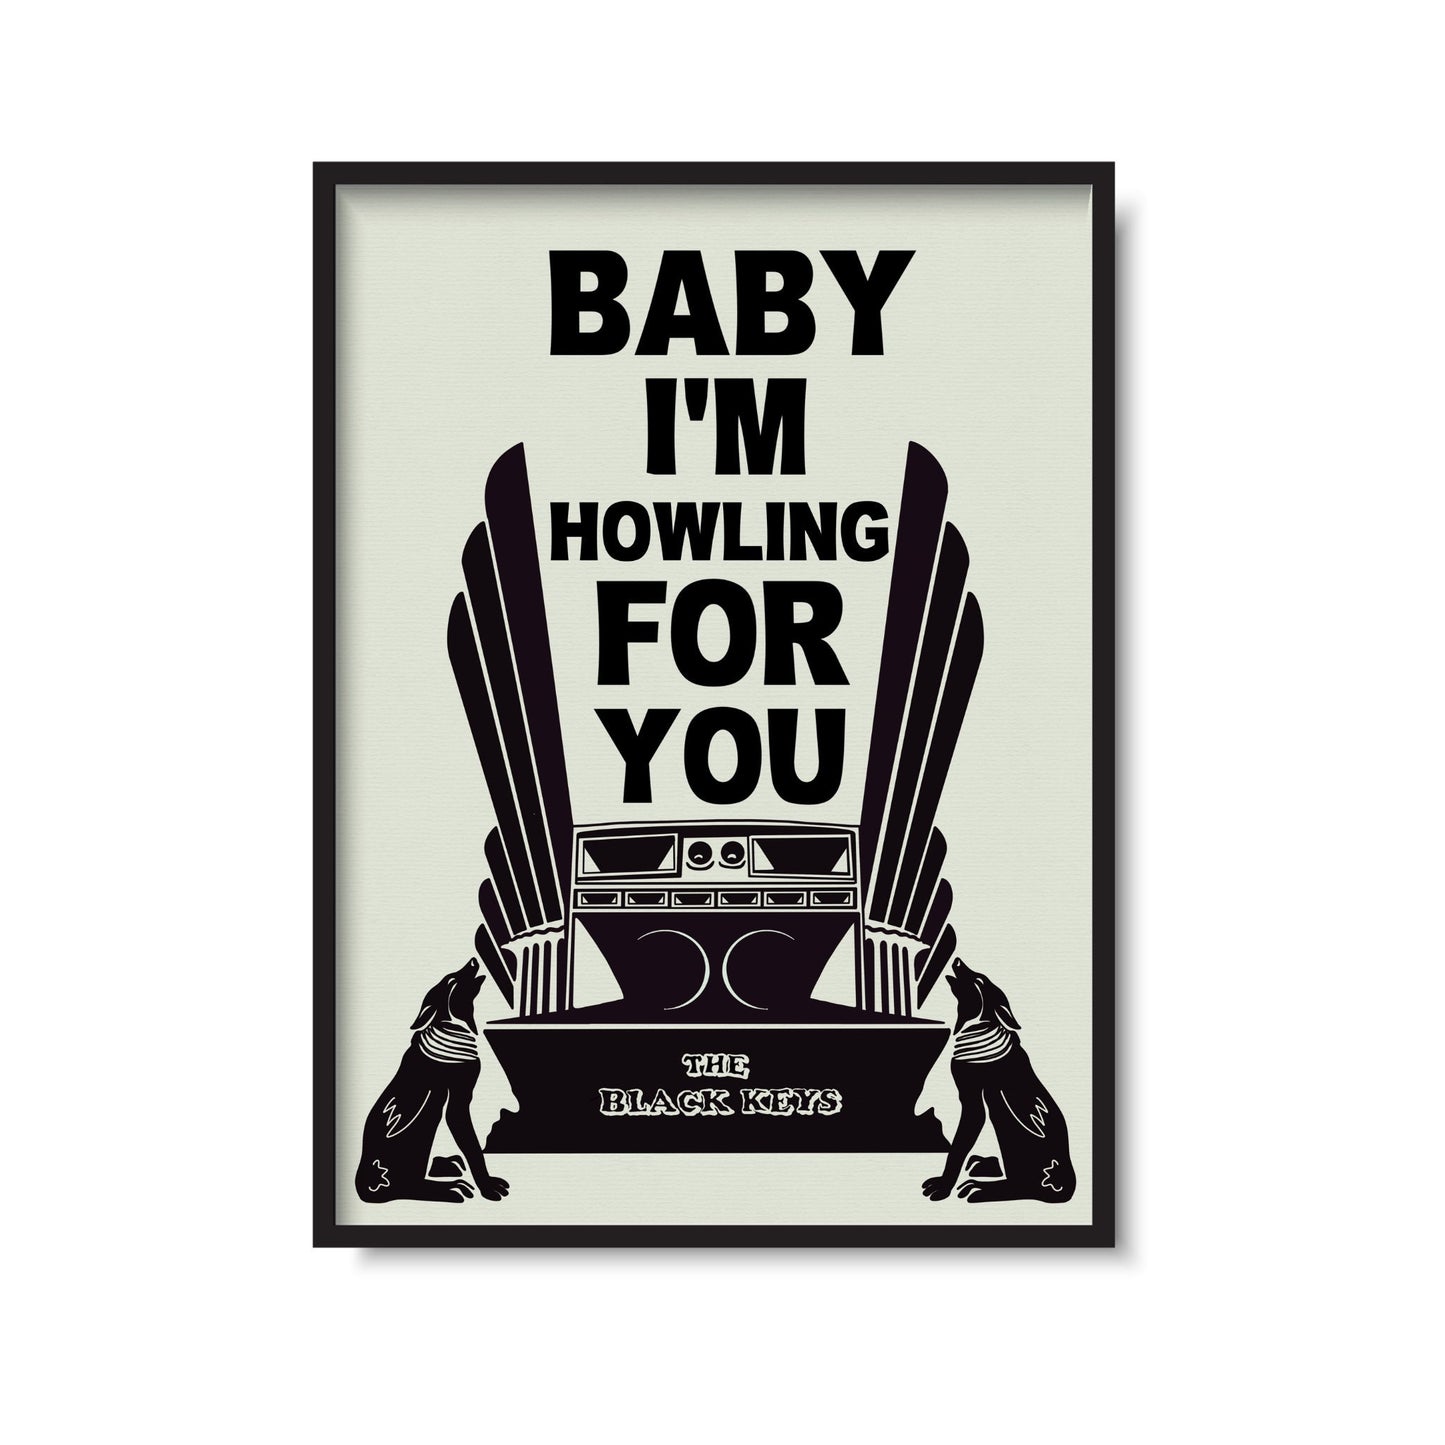 Baby I'm Howlin' for You Print